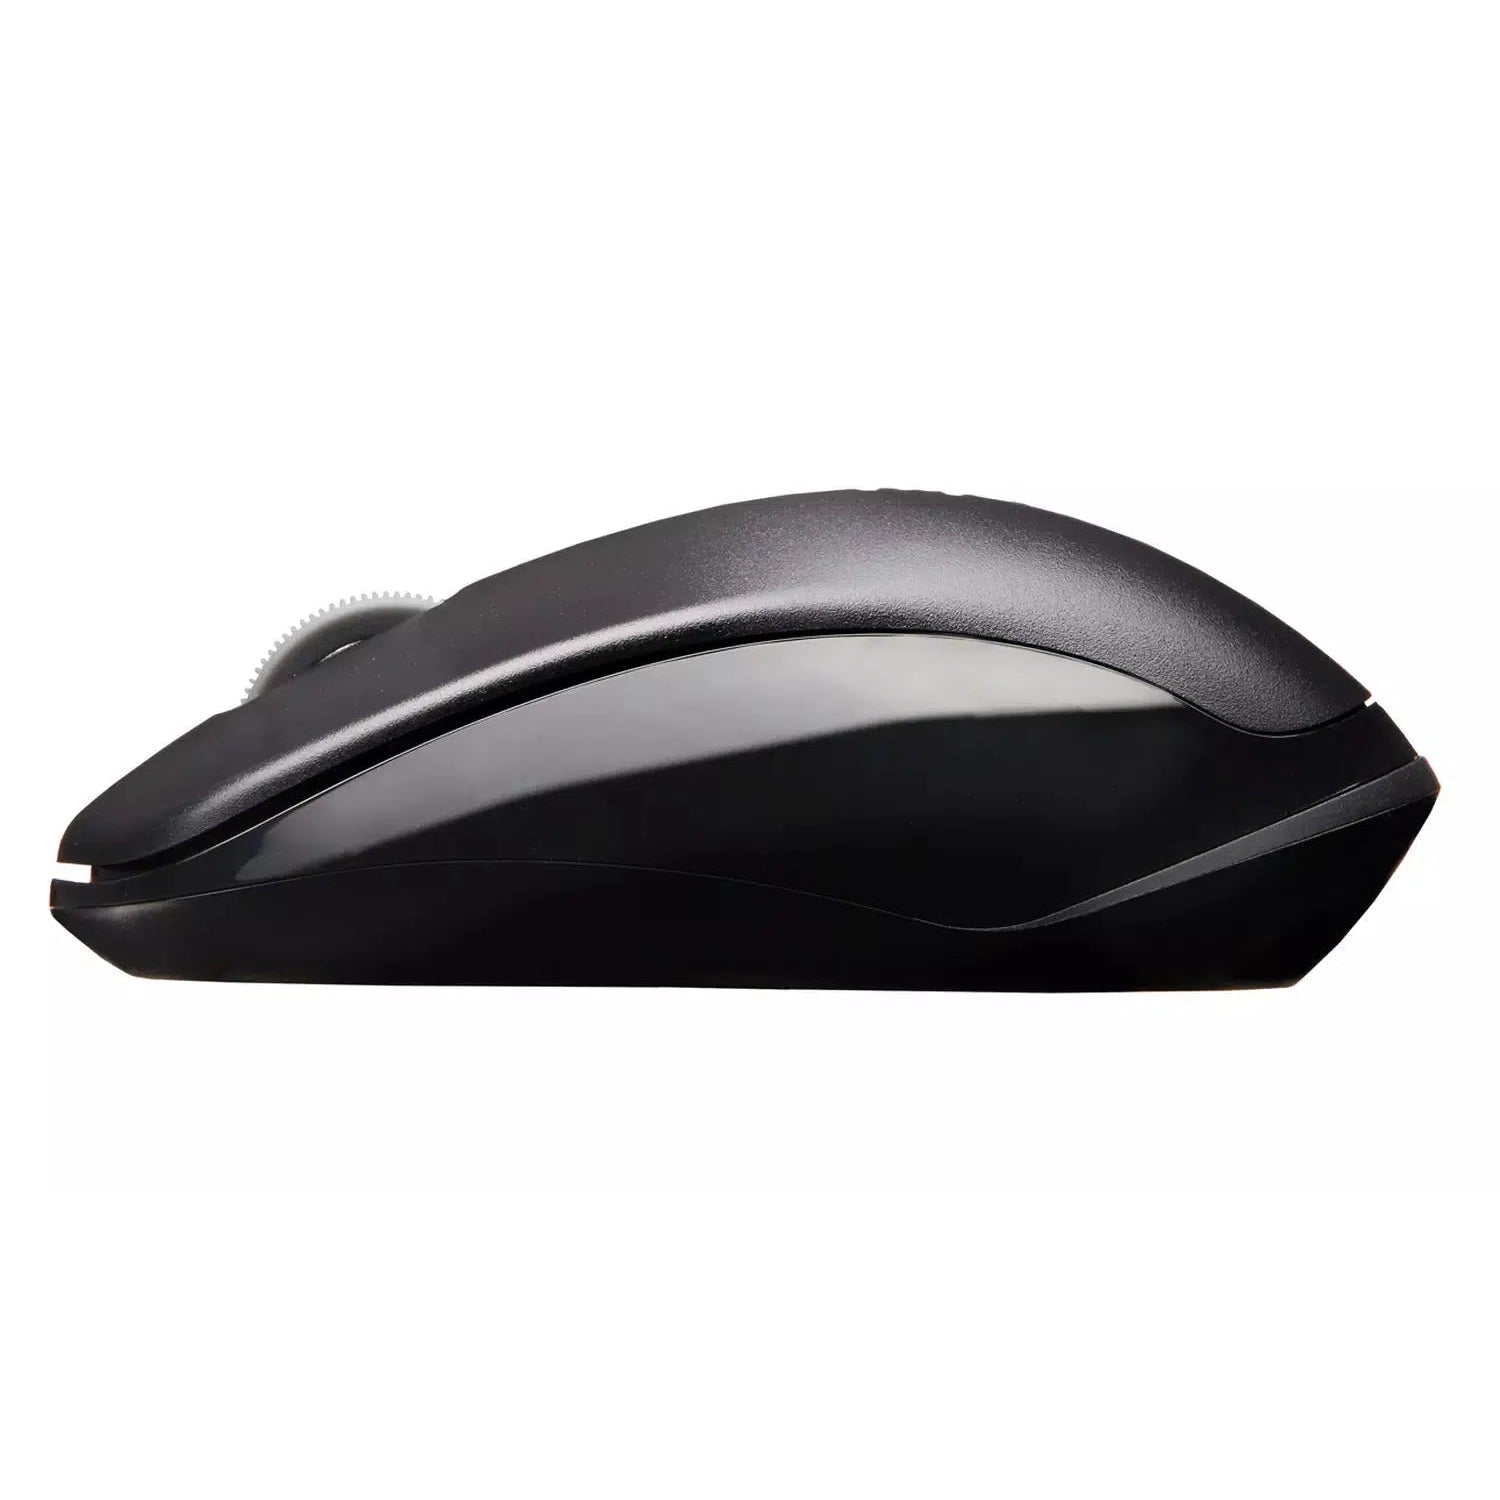 Rapoo 1620 Wireless Optical Mouse - Black - Refurbished Excellent